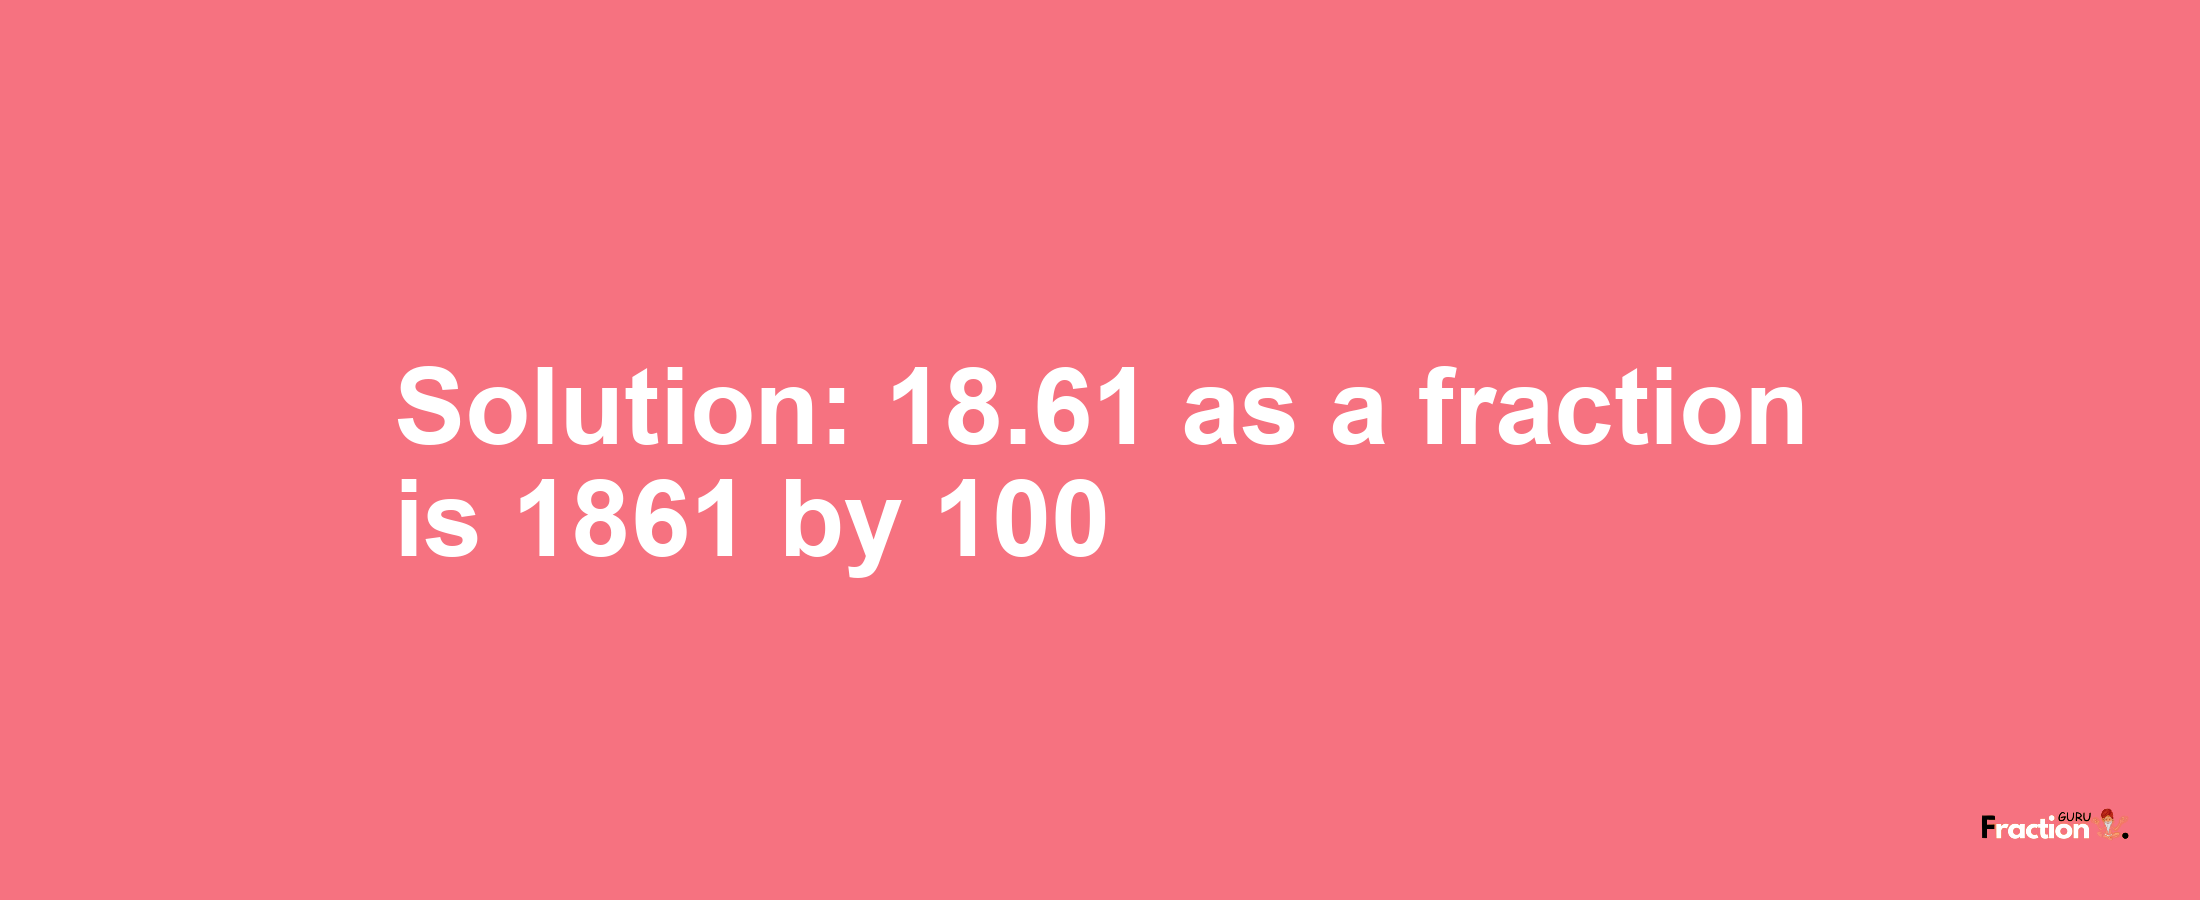 Solution:18.61 as a fraction is 1861/100